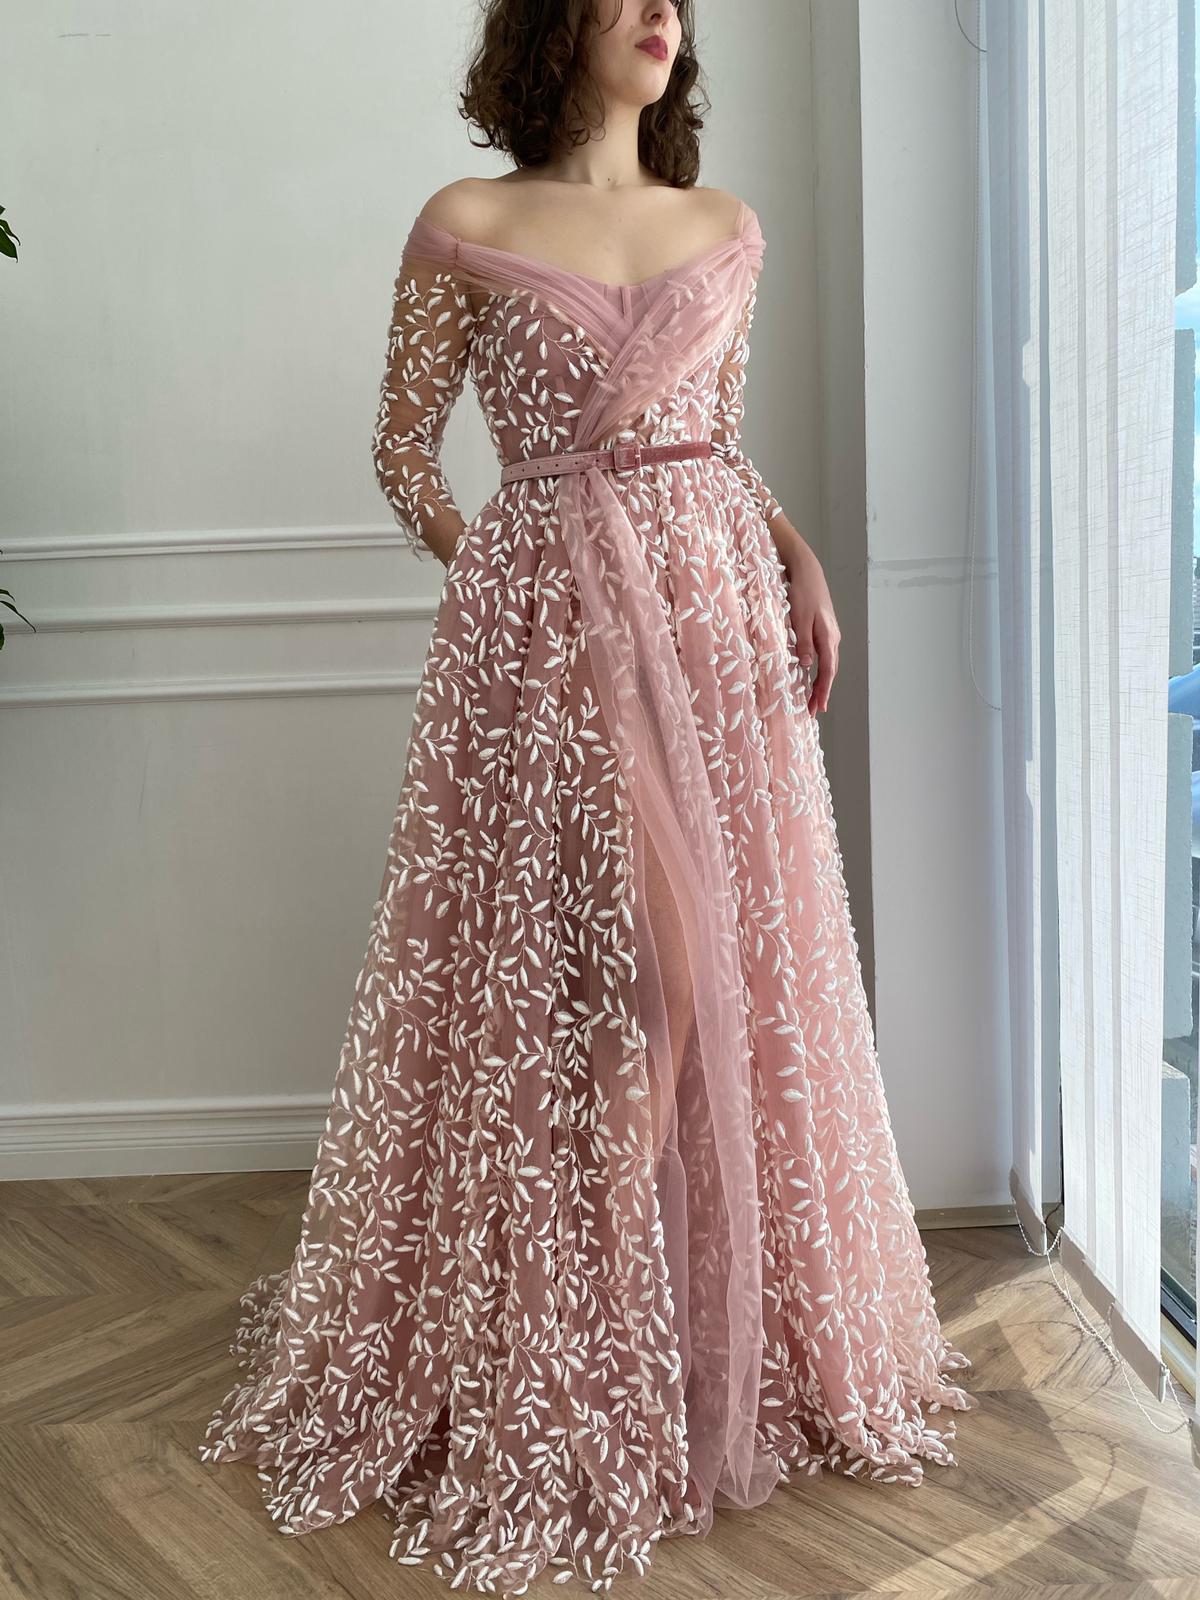 Pink A-Line dress with belt and long off the shoulder sleeves